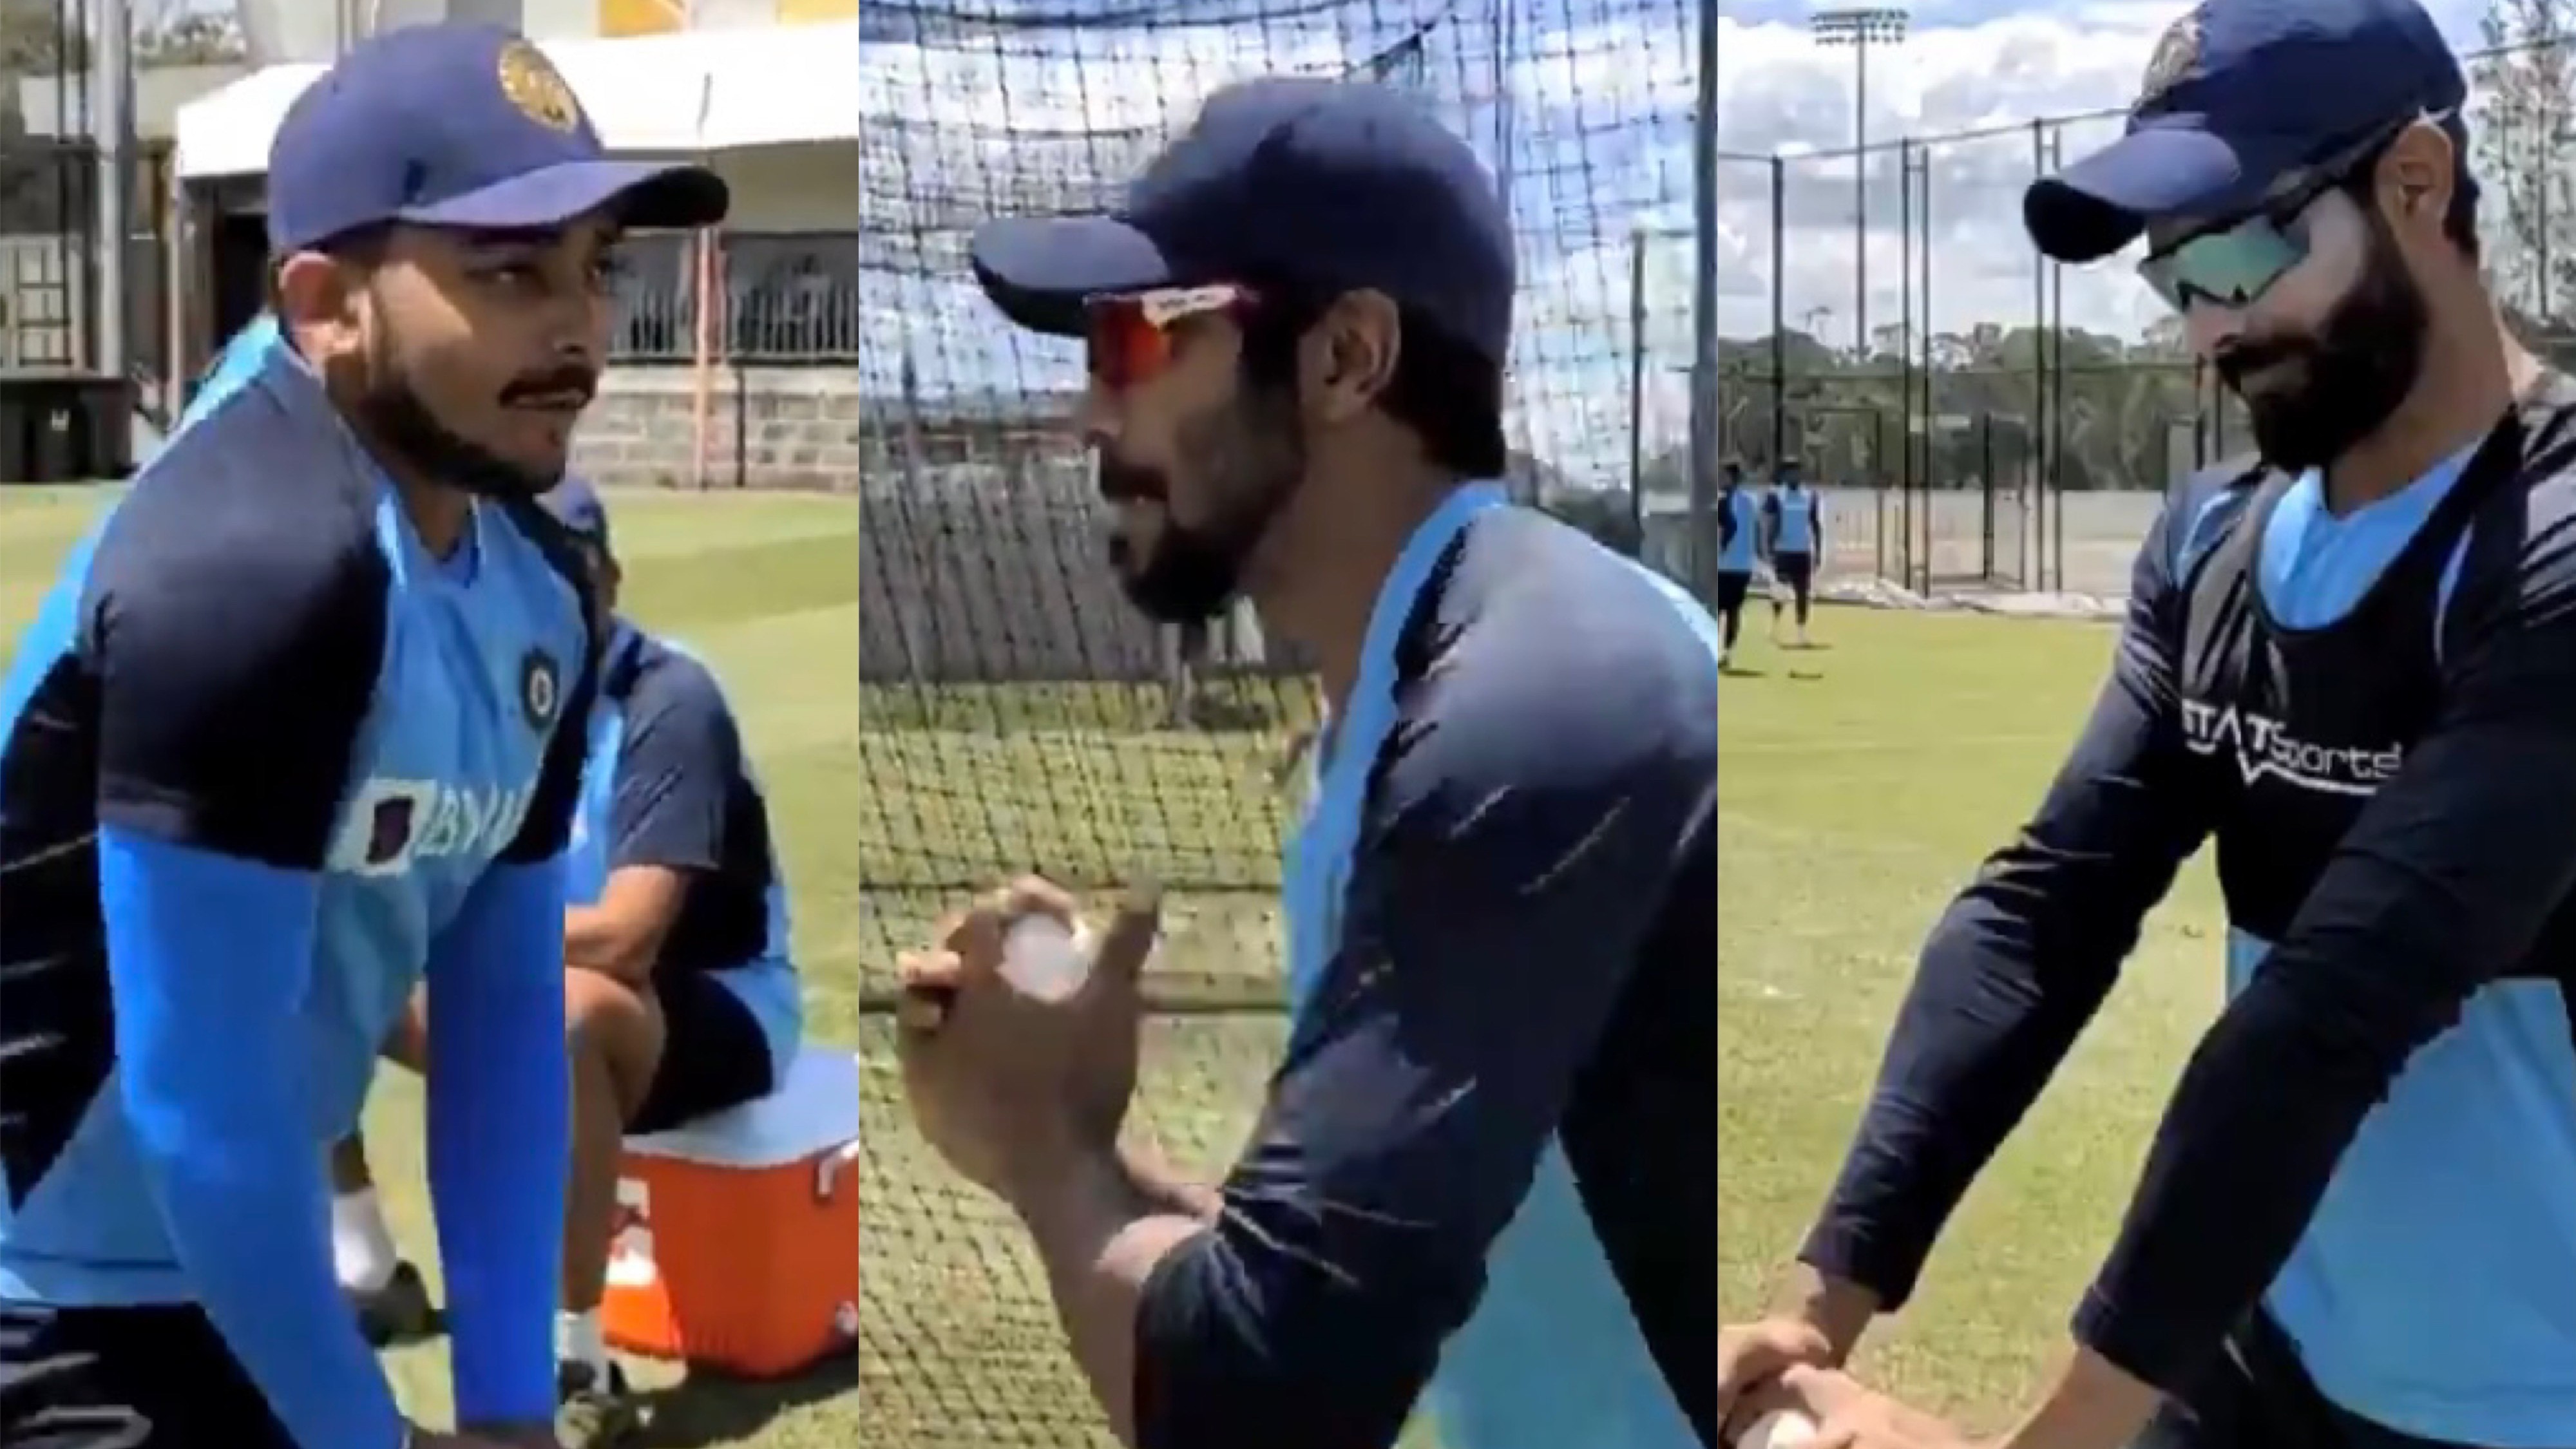 AUS v IND 2020-21: WATCH – Bumrah, Jadeja and Shaw imitate bowling actions at nets